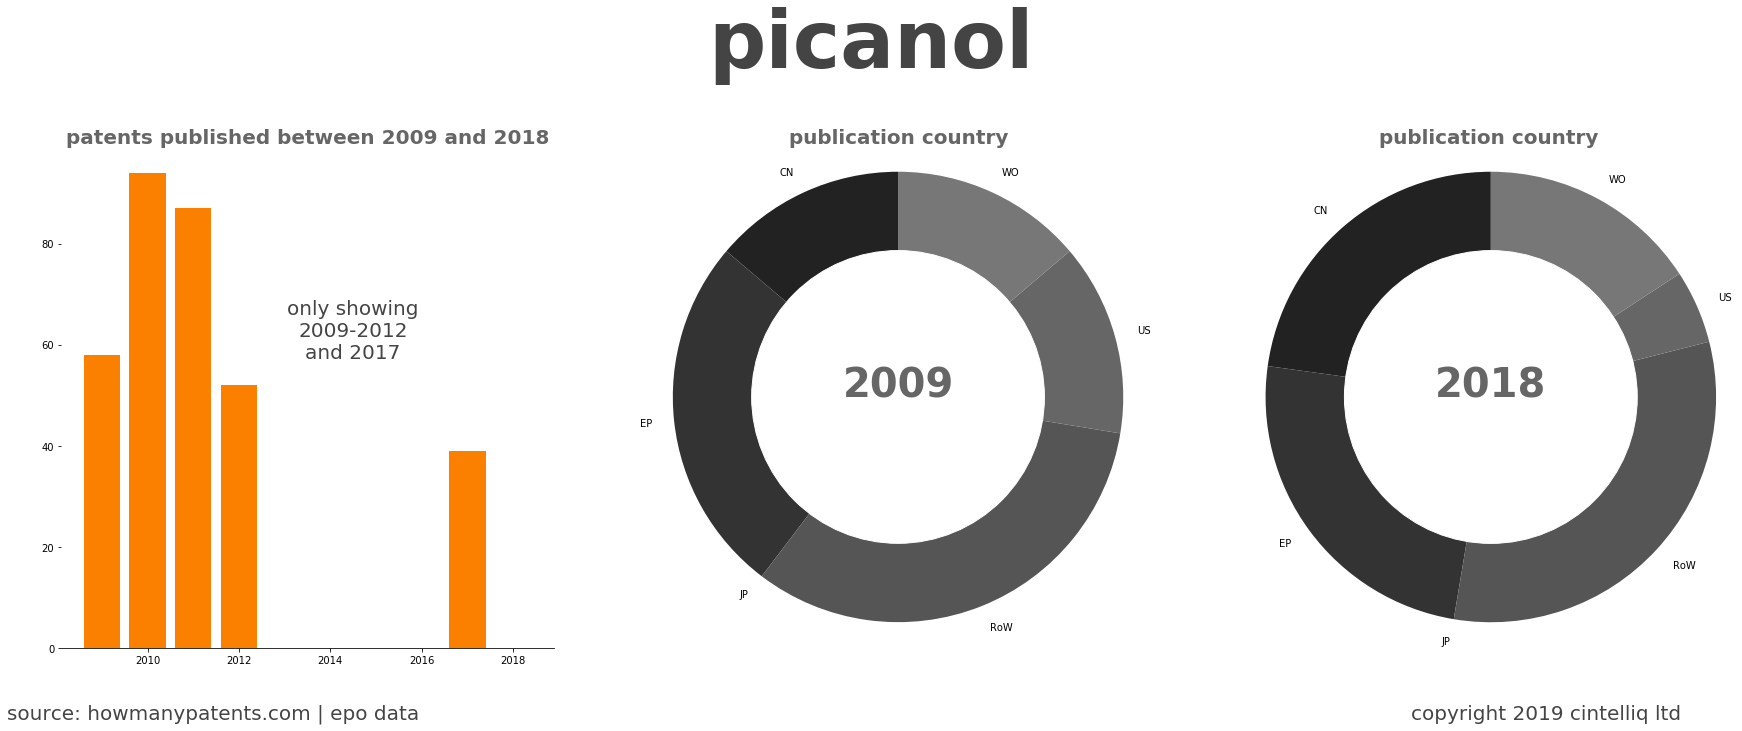 summary of patents for Picanol